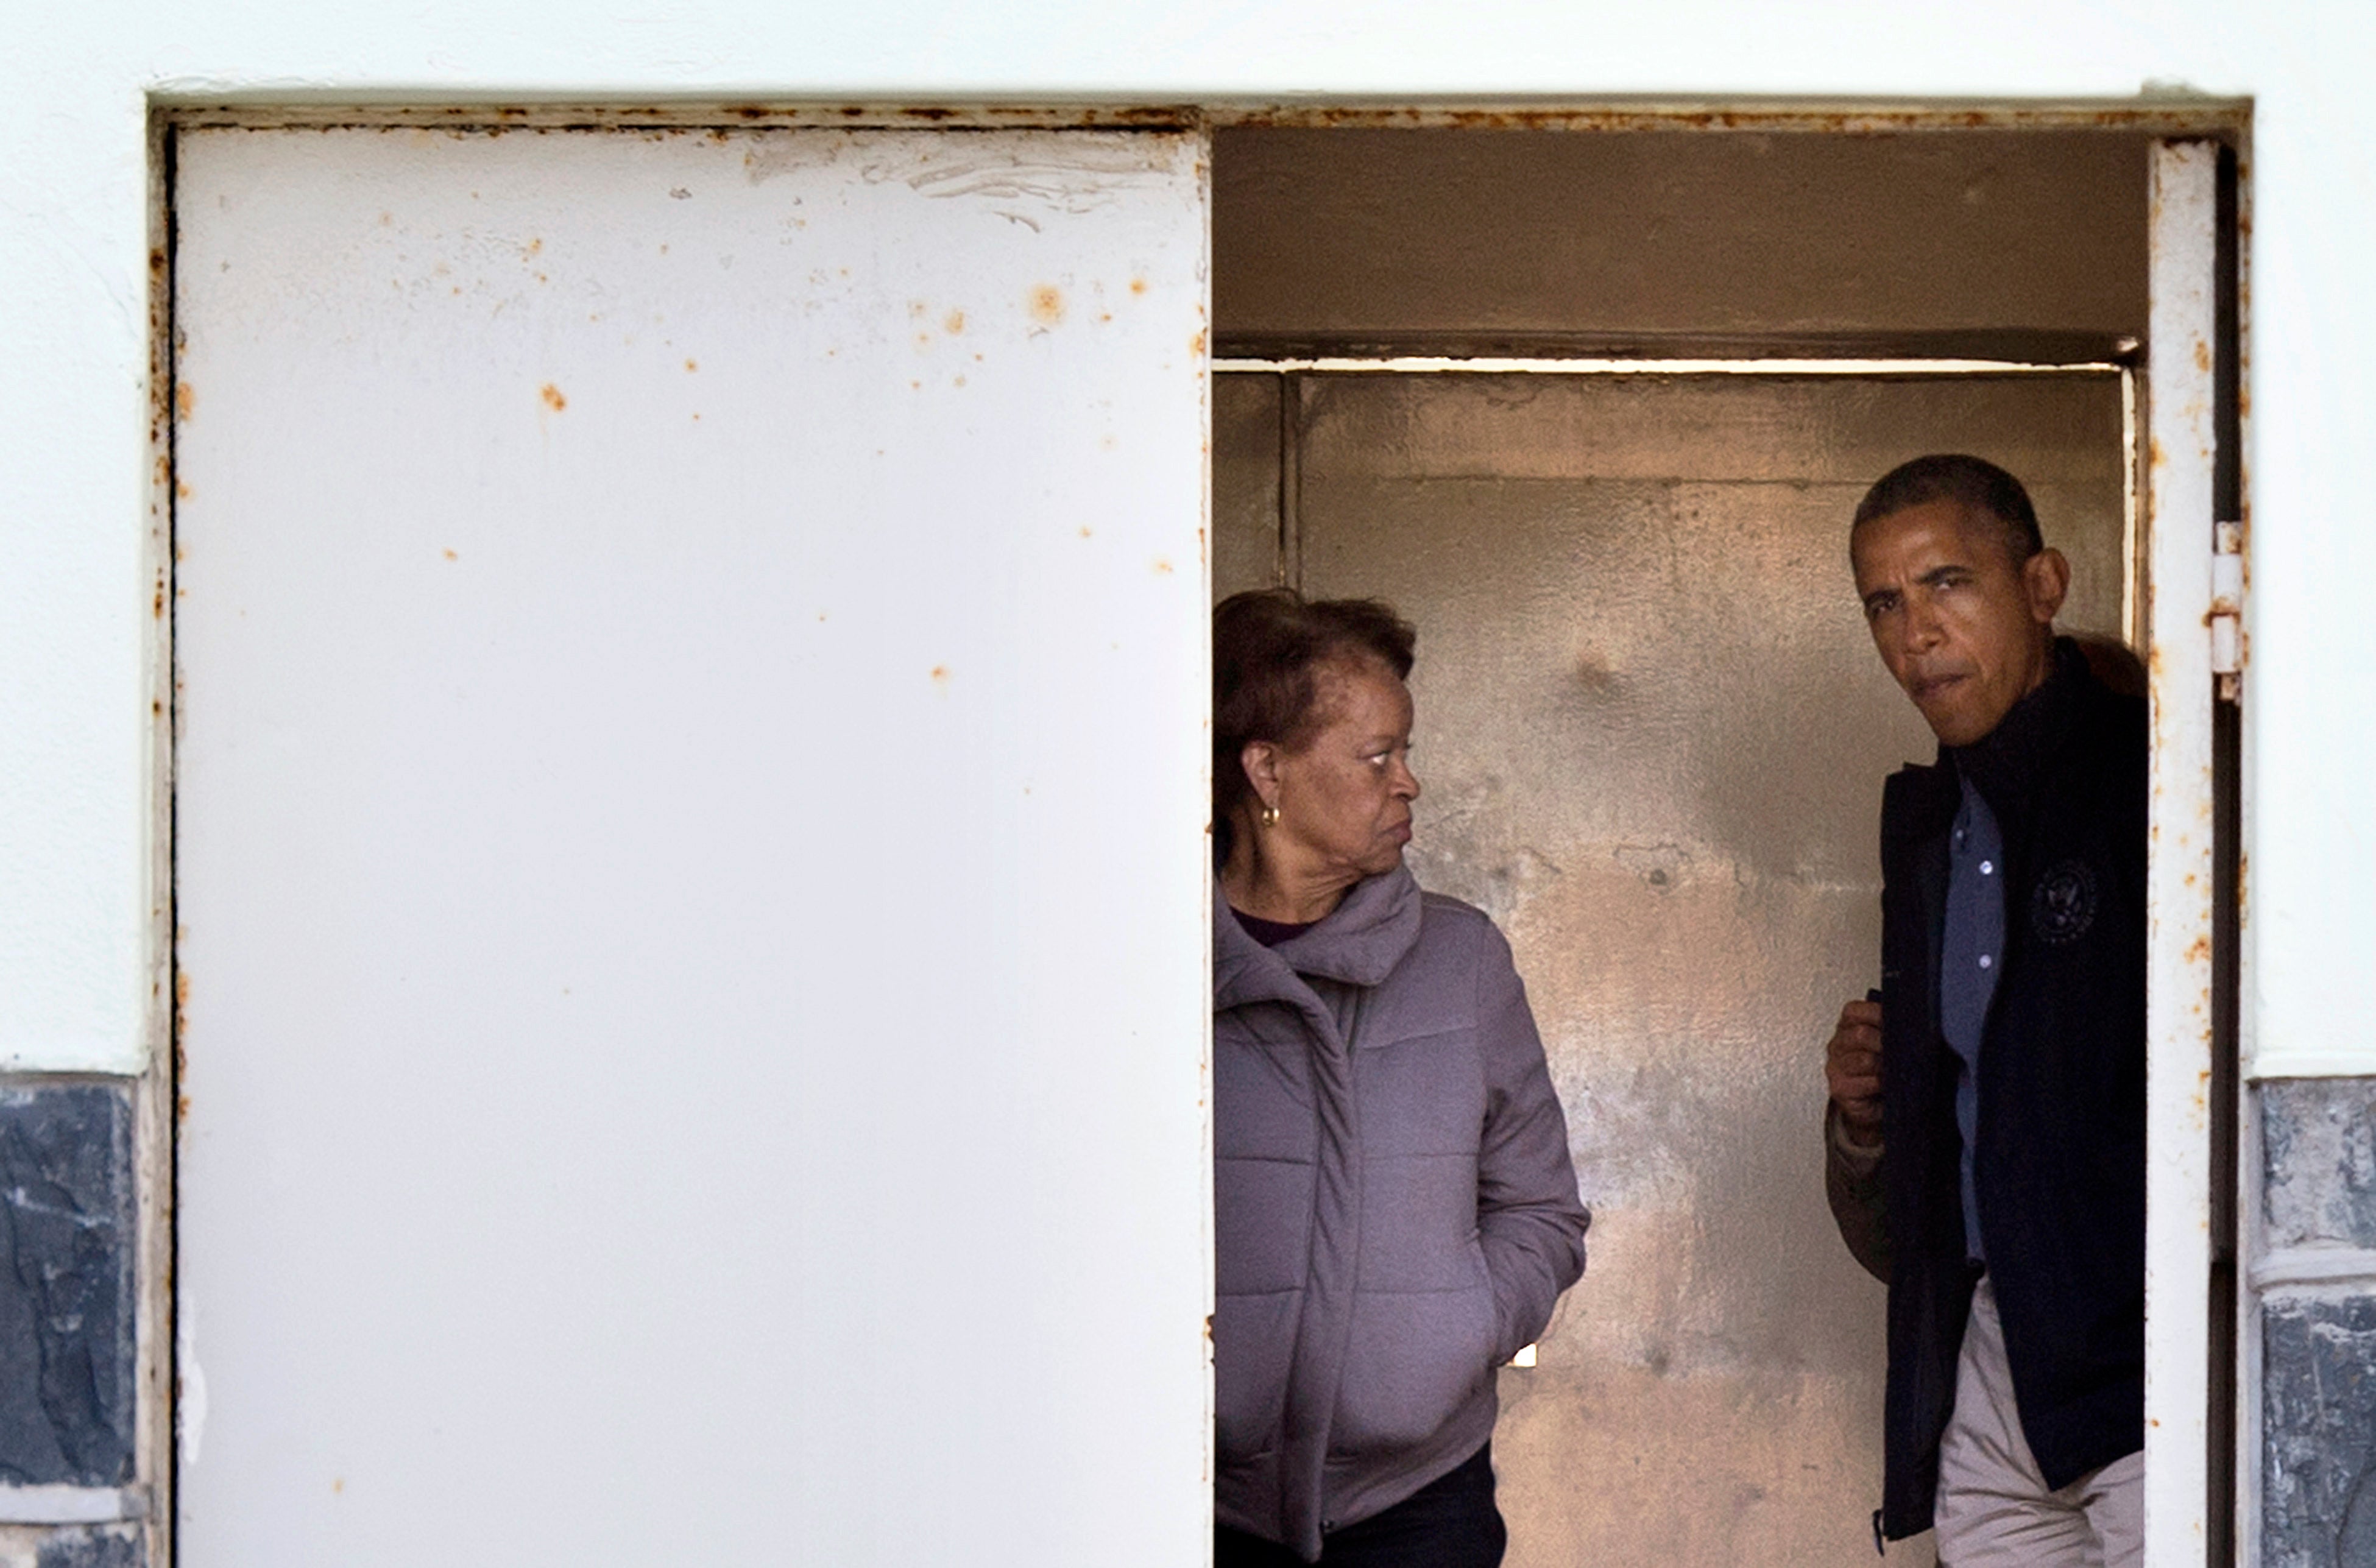 Barack Obama and Marian Robinson arrive June 30, 2013 for a tour of Robben Island, where South African anti-apartheid activist Nelson Mandela was imprisoned.